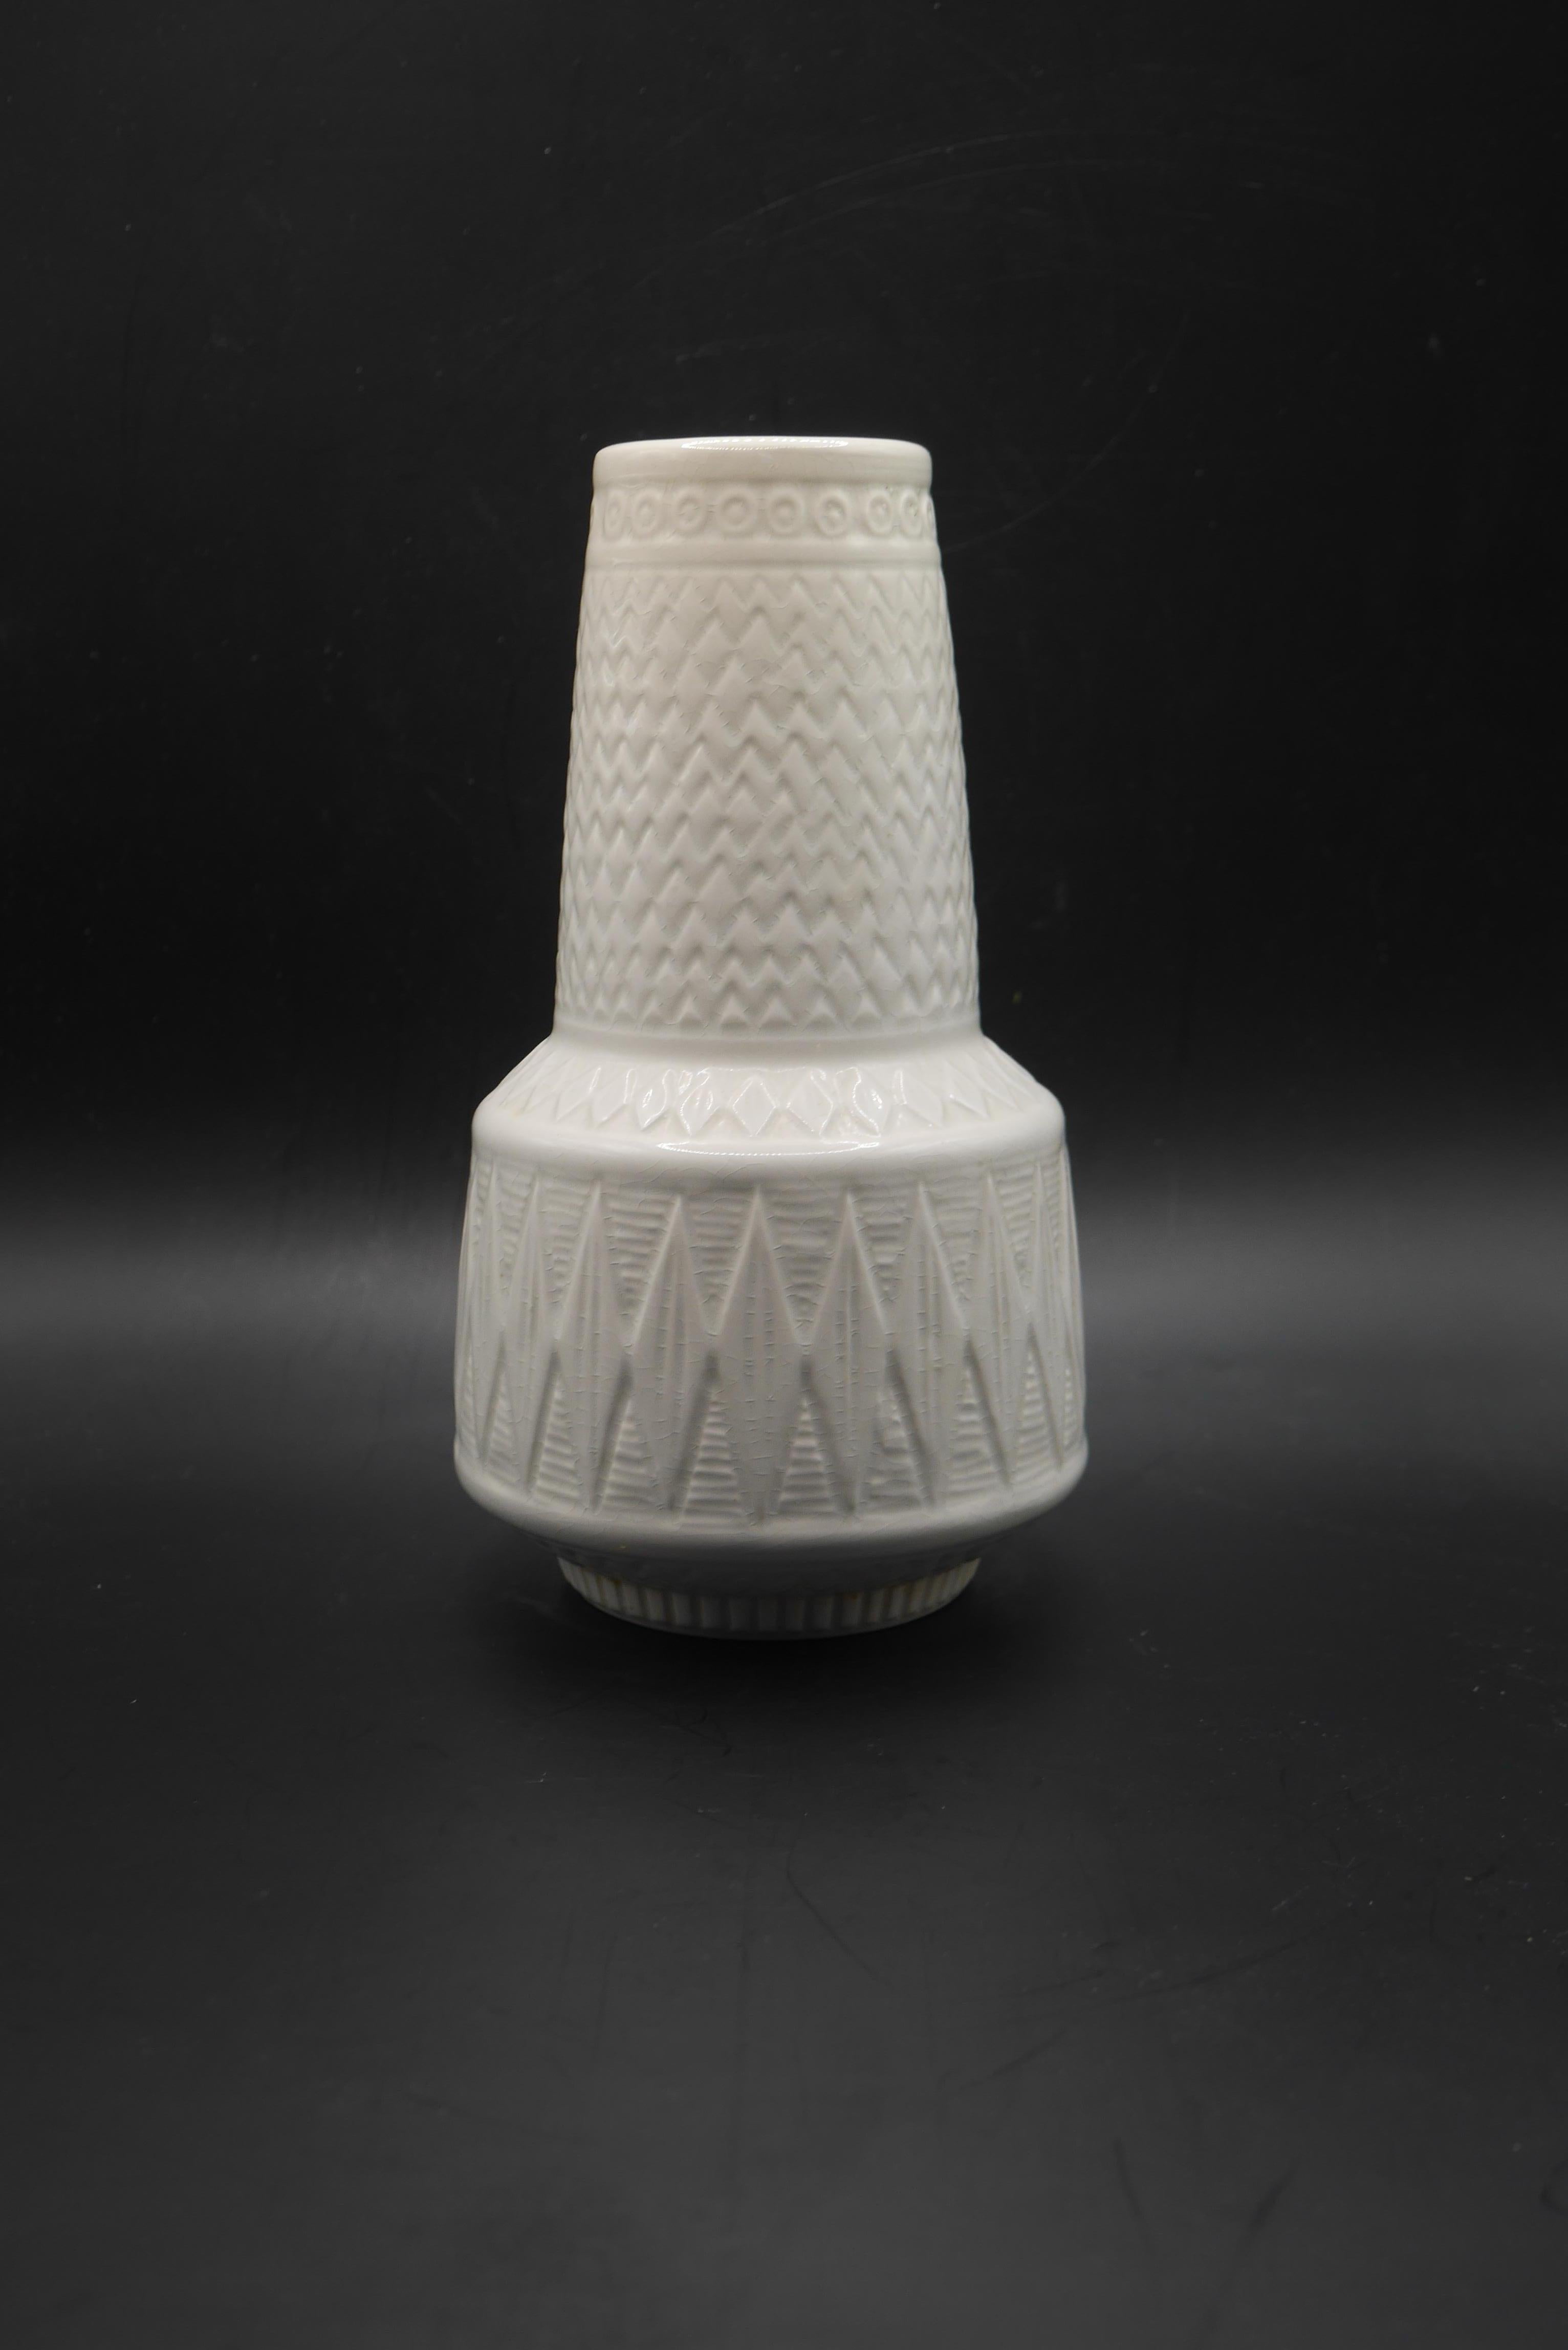 An unusual white version of the 'Oliv' vase by Gunnar Nylund, with intricate patterning on the body of the white glazed vase. 

Rörstrand porcelain was one of the most famous Swedish porcelain manufacturers, with production initially at